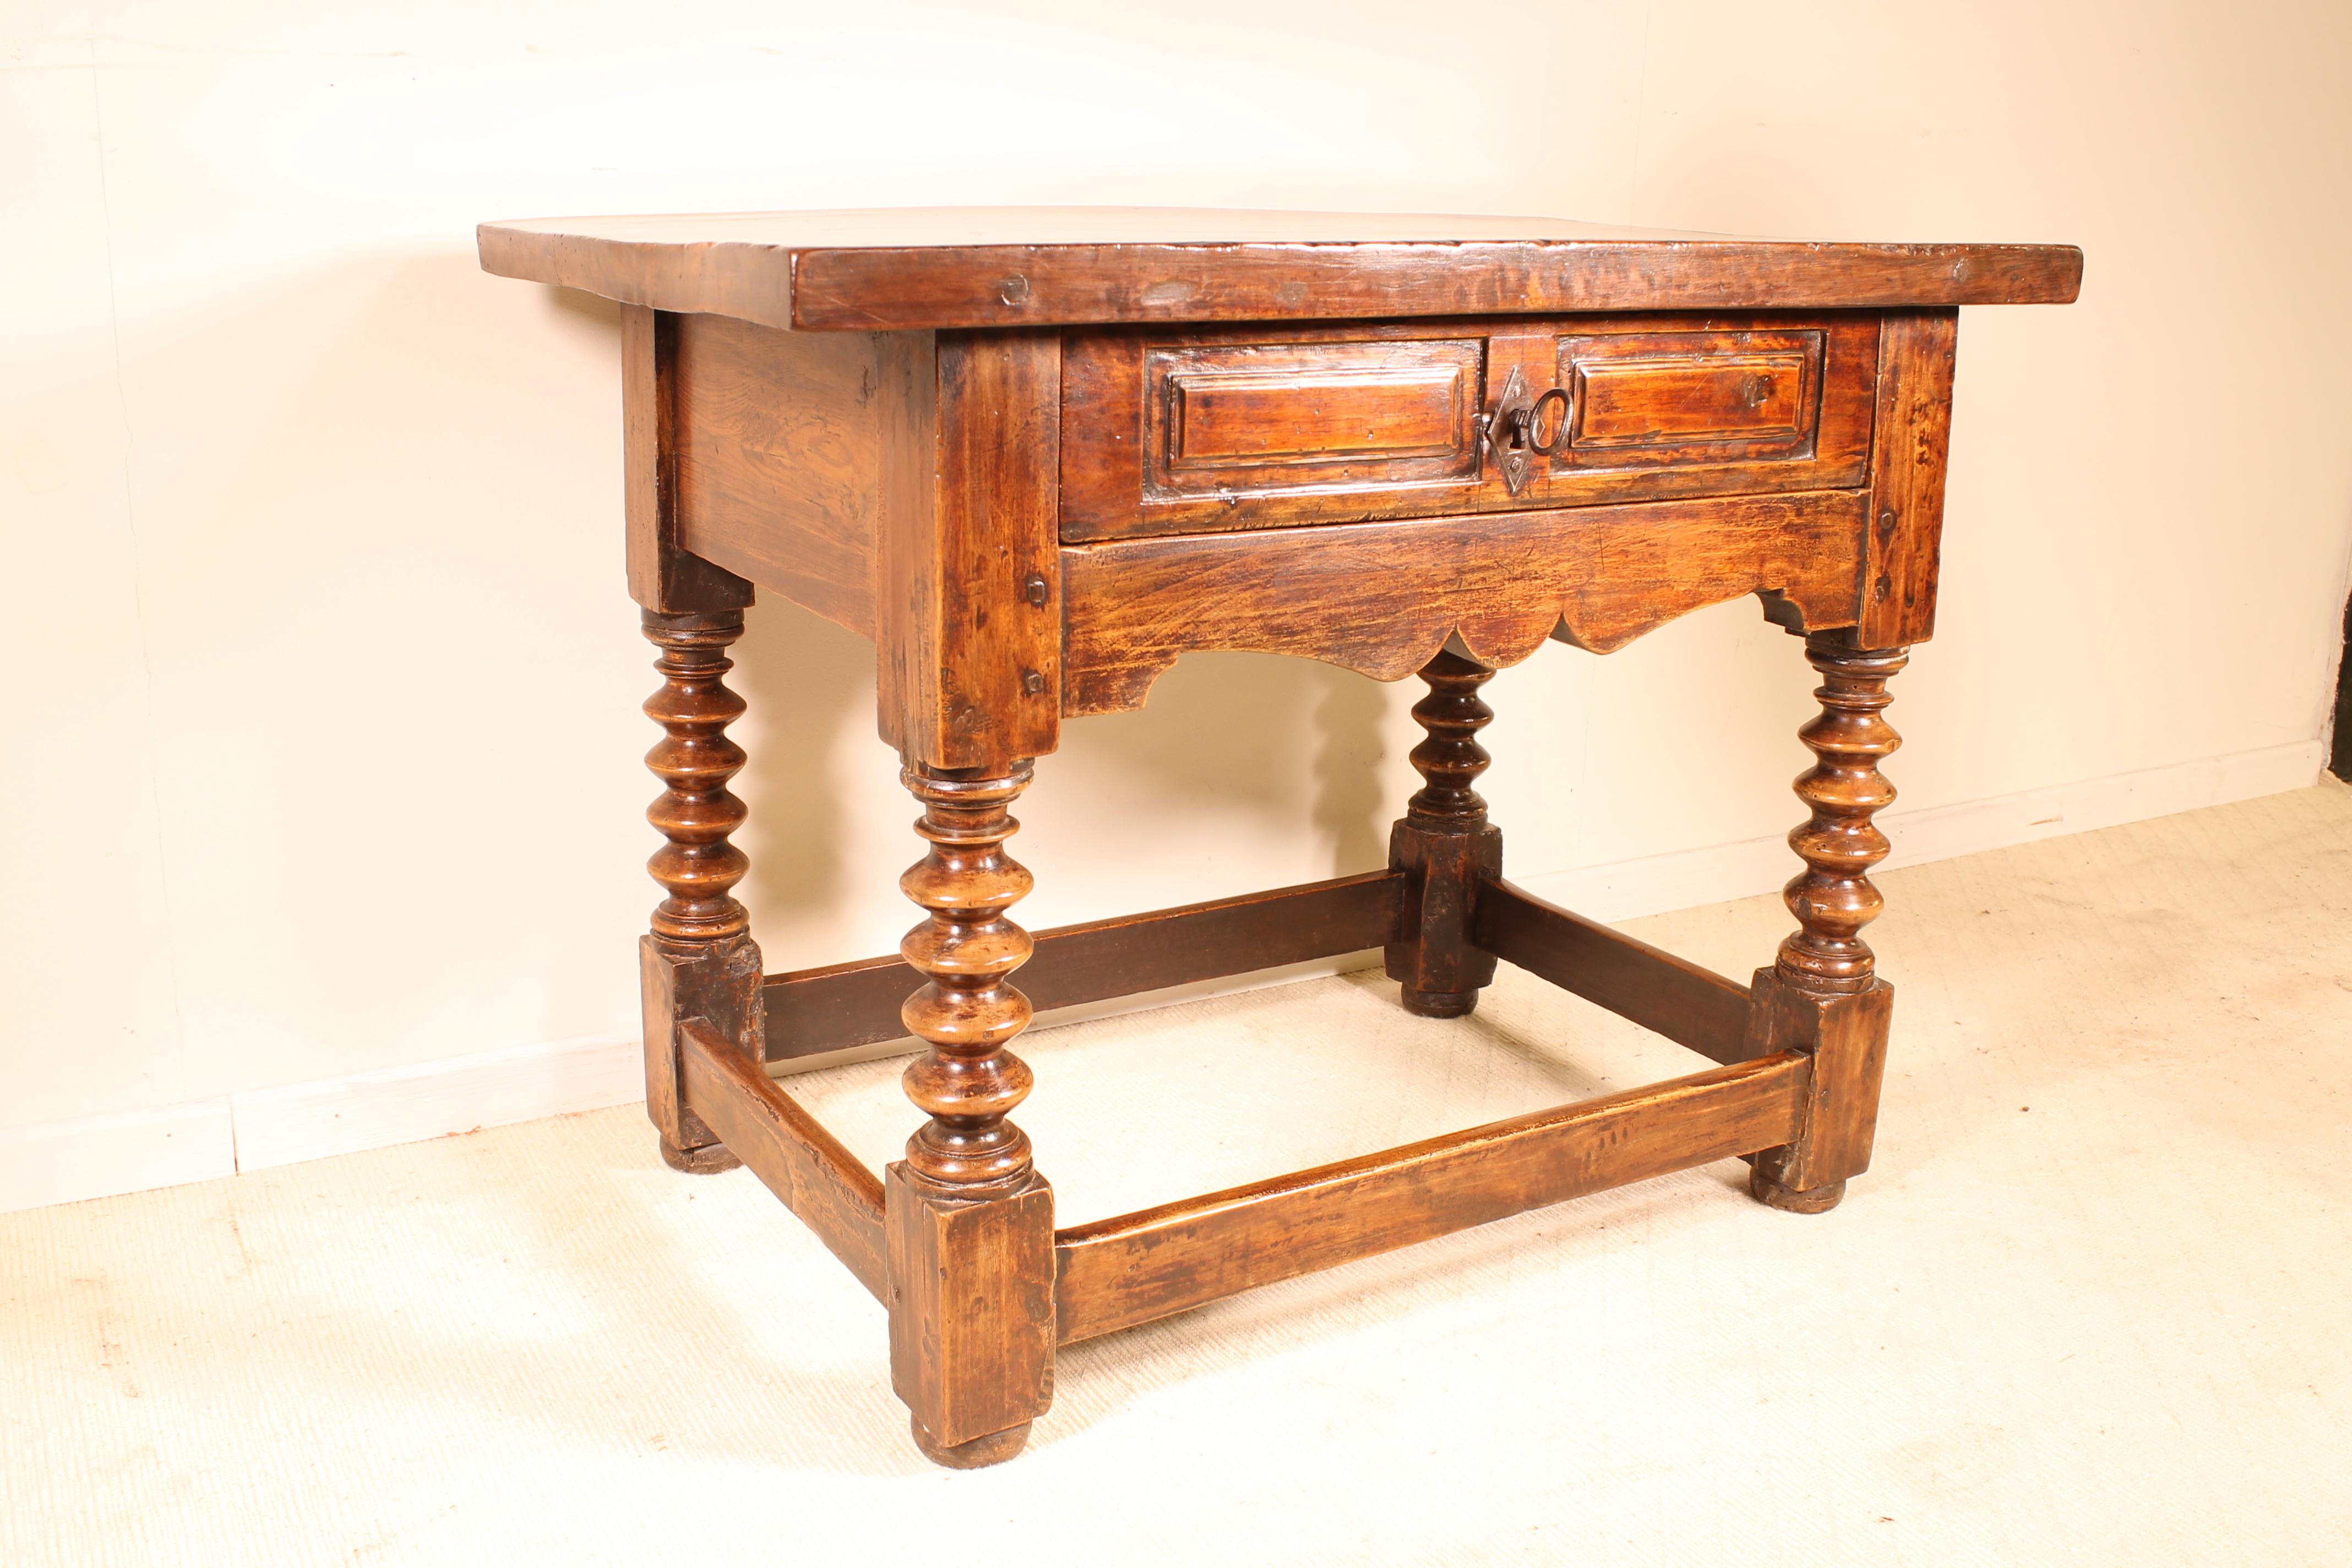 Spanish Renaissance walnut table circa 1600 
Sublime small table with a beautiful large walnut top. 

Very interesting base with turned legs that bring a nice balance to this table 

Beautiful original patina and in very good